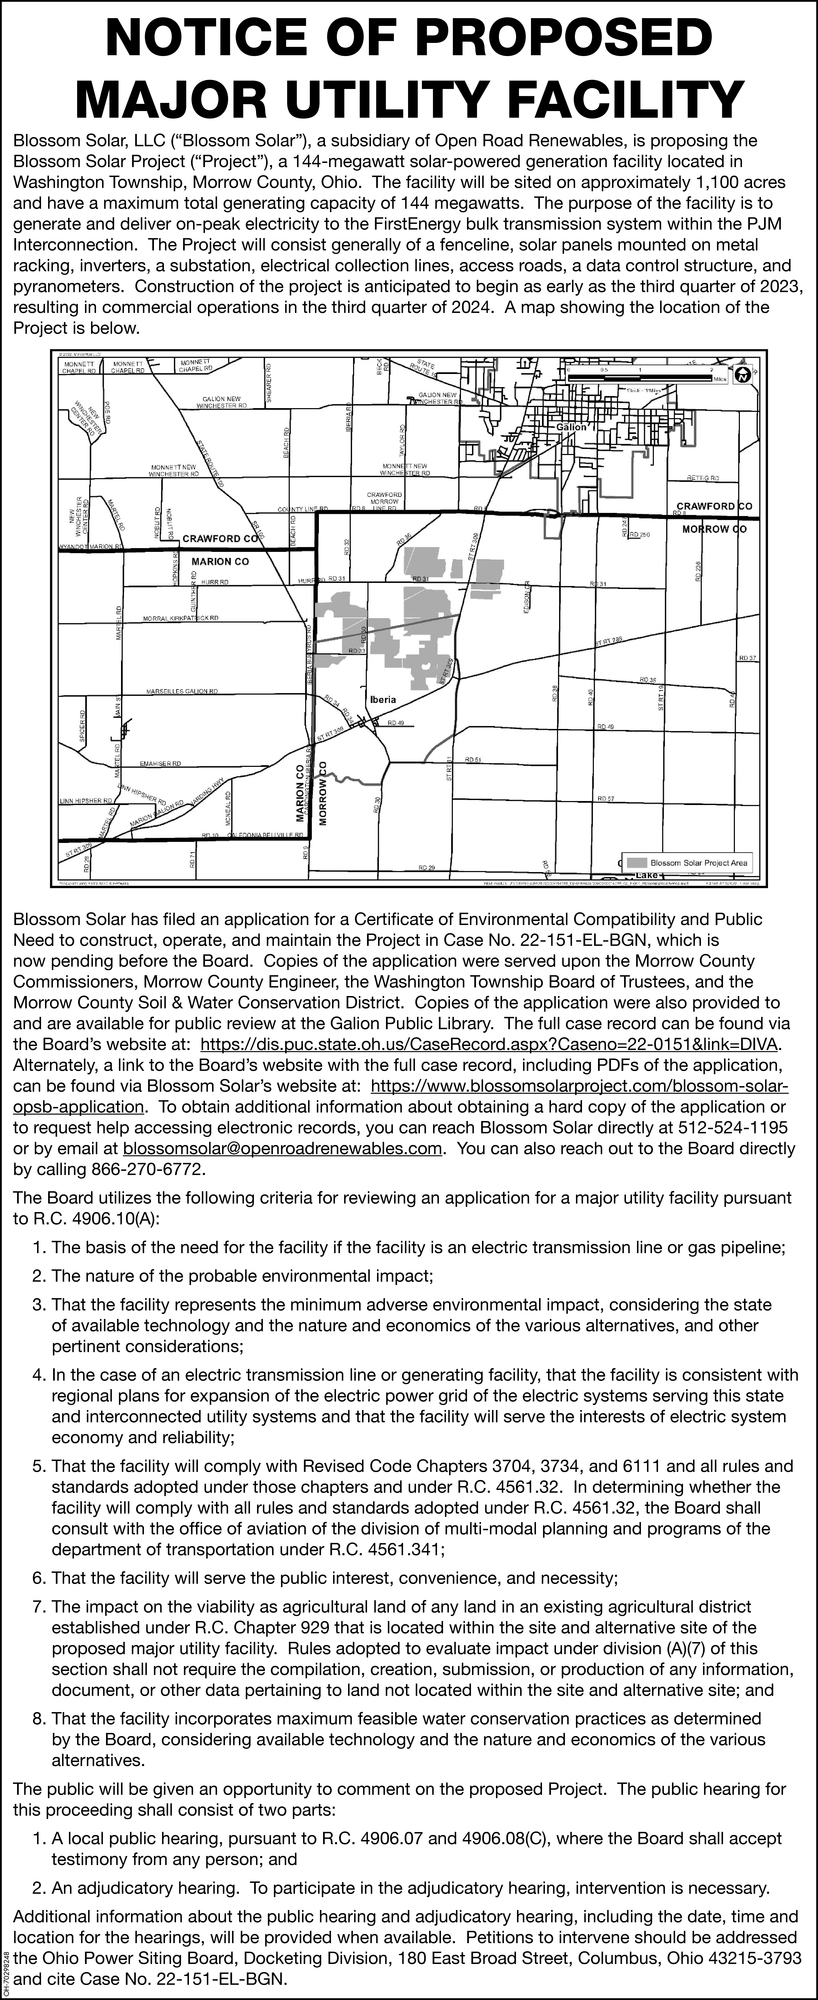 Notice of Proposed Major Utility Facility